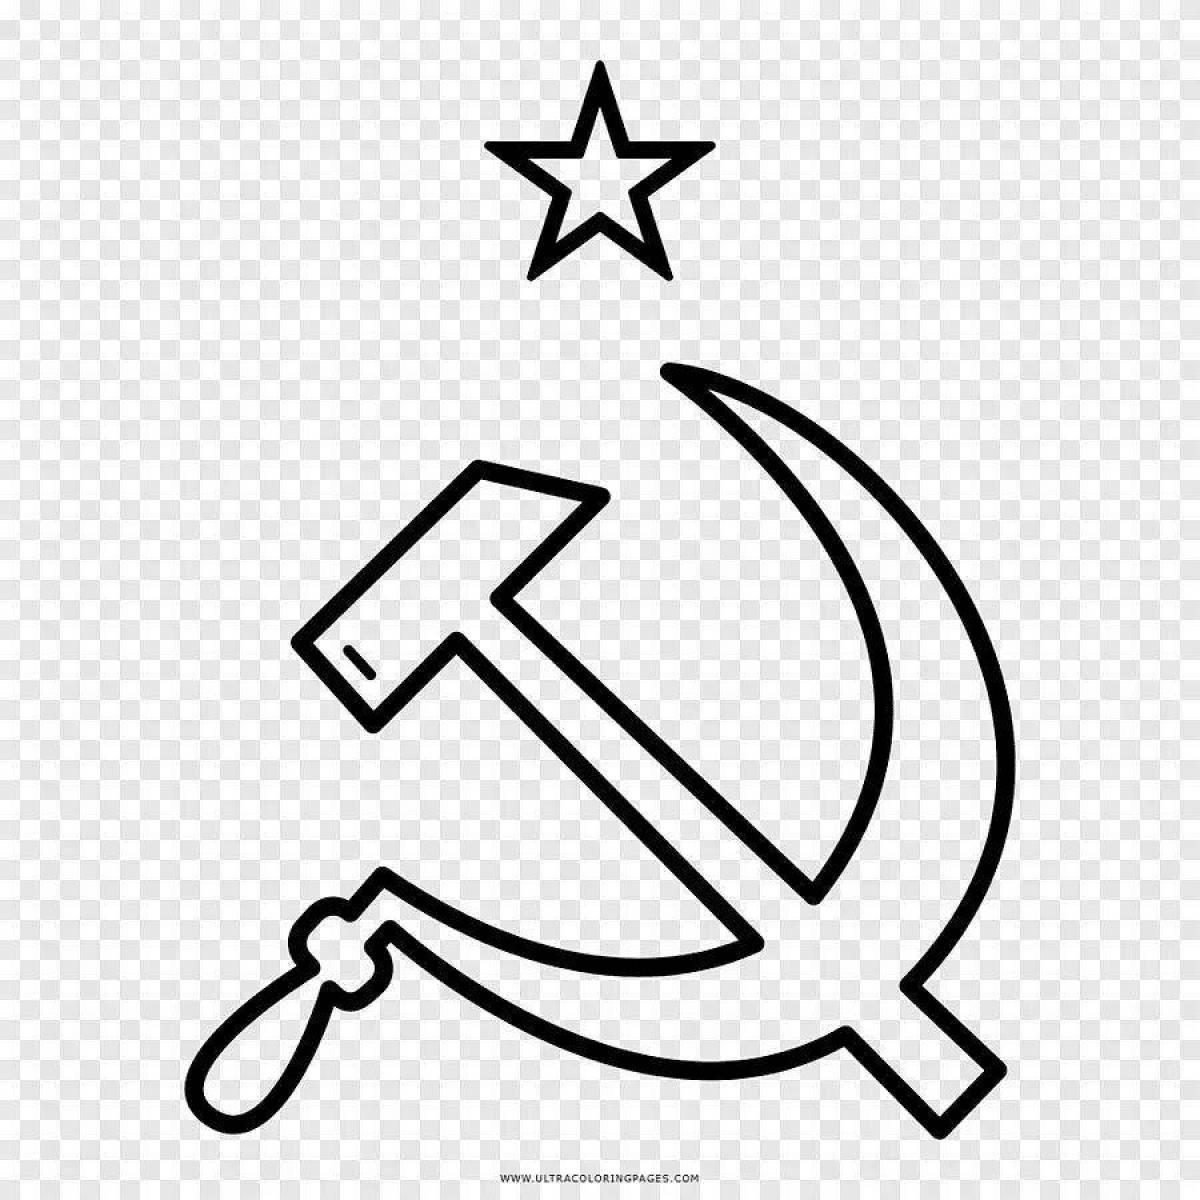 Coloring book luxury flag of the soviet union